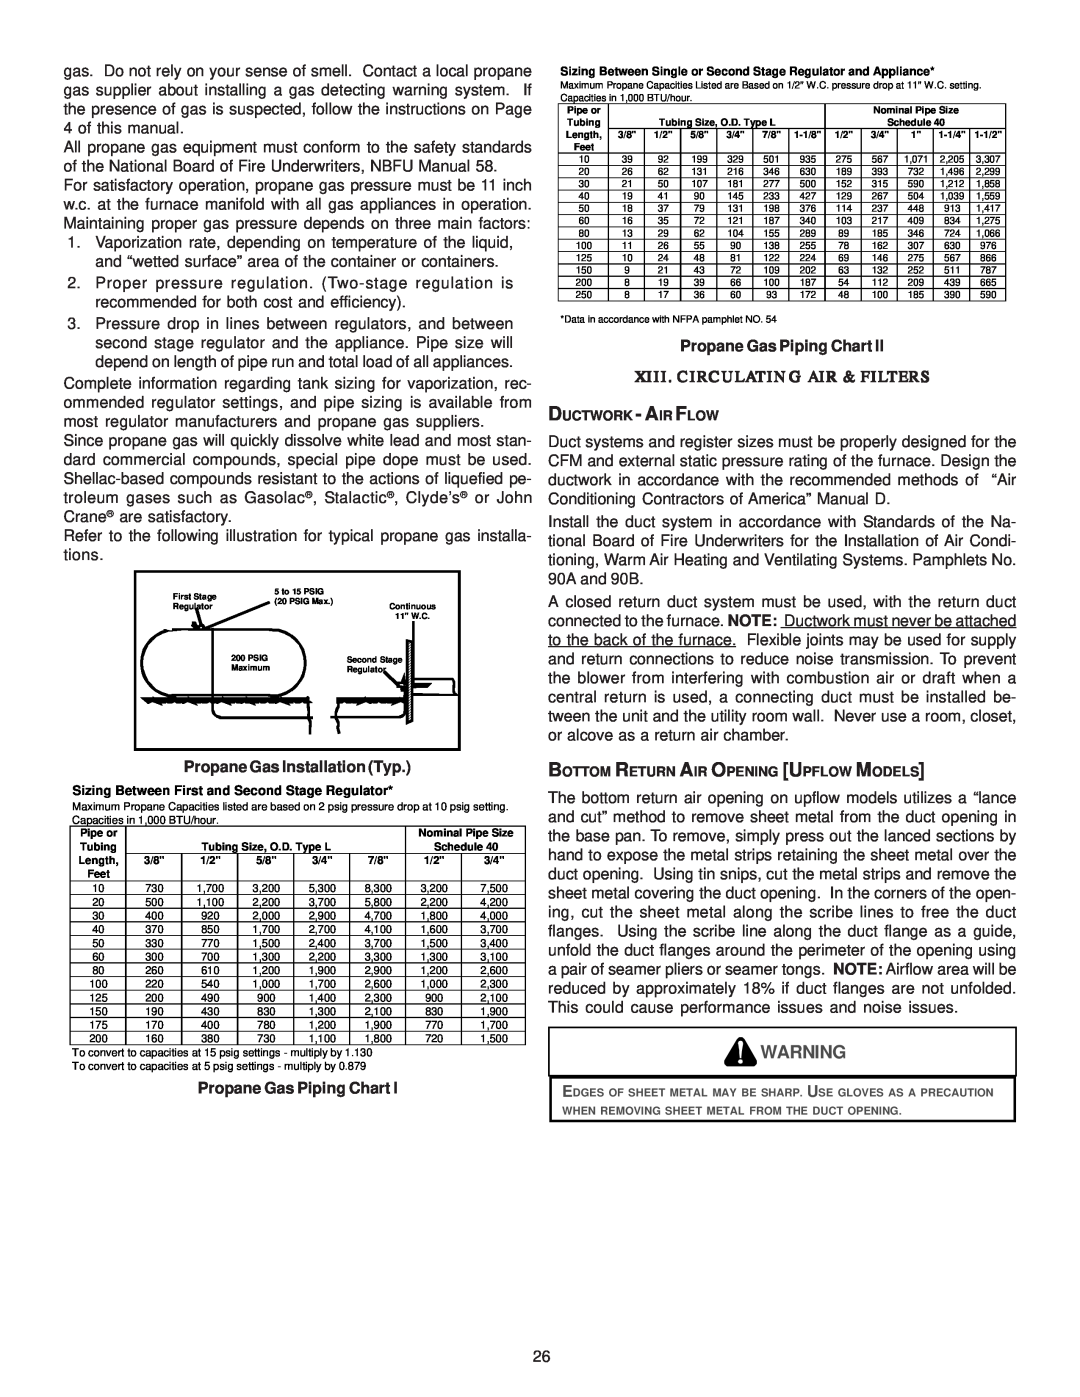 Amana AMV9, ACV9 Propane Gas Installation Typ, Propane Gas Piping Chart, Xiii. Circulating Air & Filters 